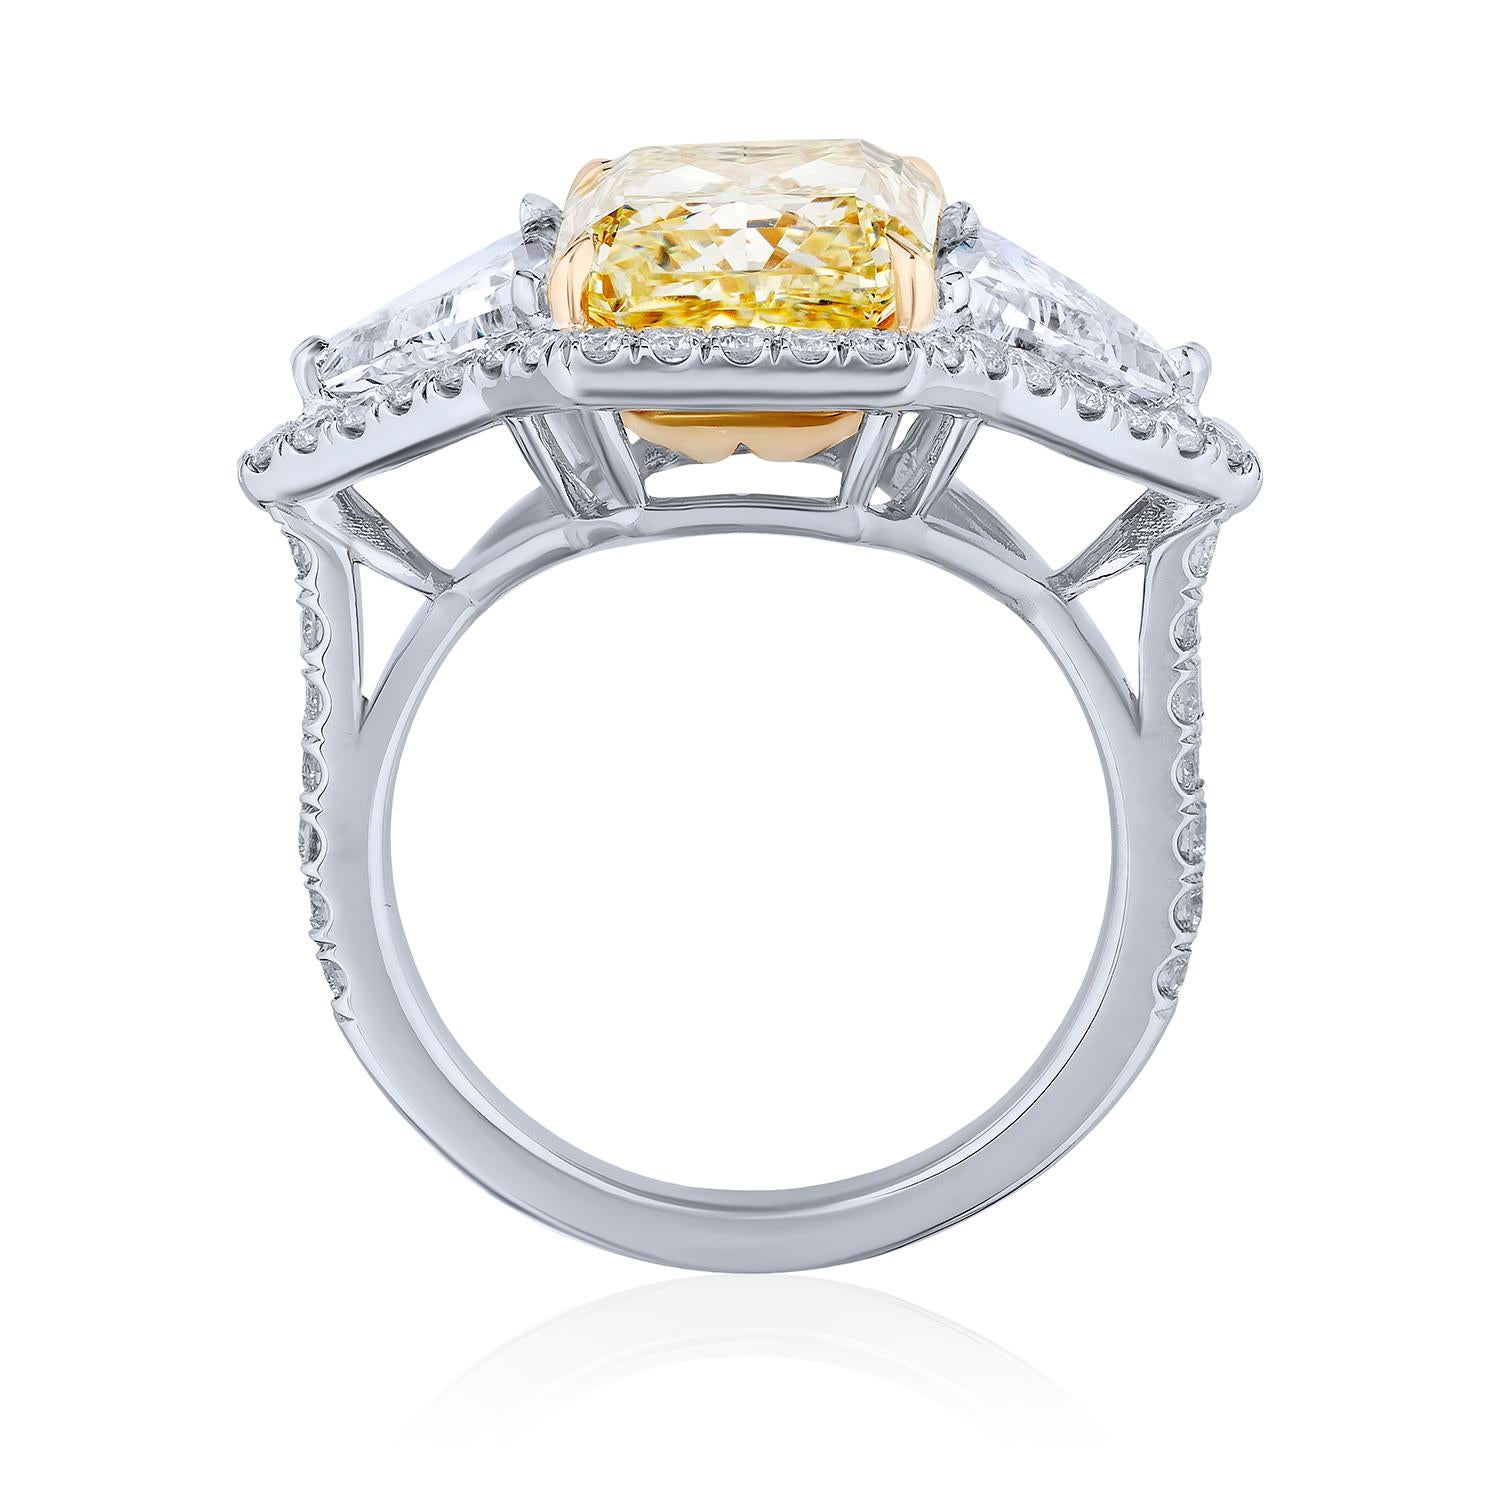 Radiant Cut GIA Certified 5.02 Carat Radiant Yellow Diamond Ring For Sale